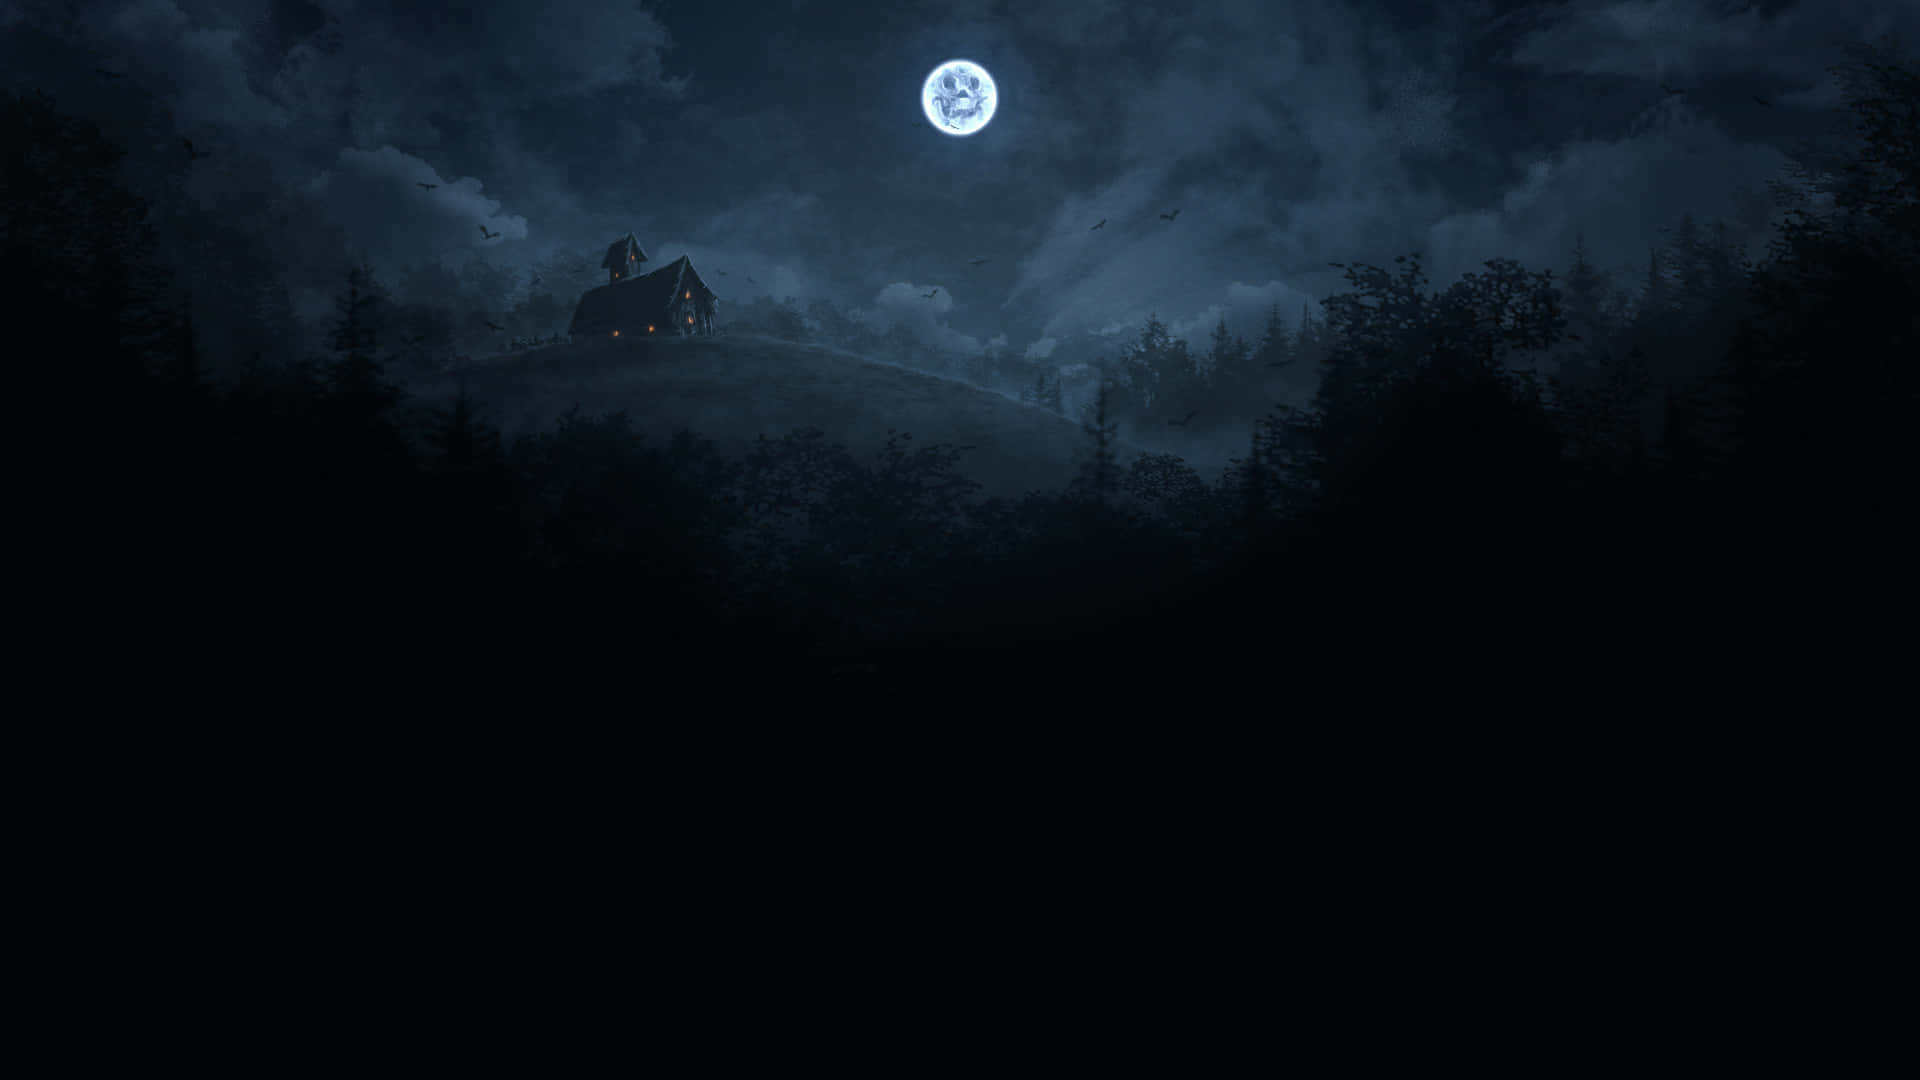 a dark night scene with a moon and a house